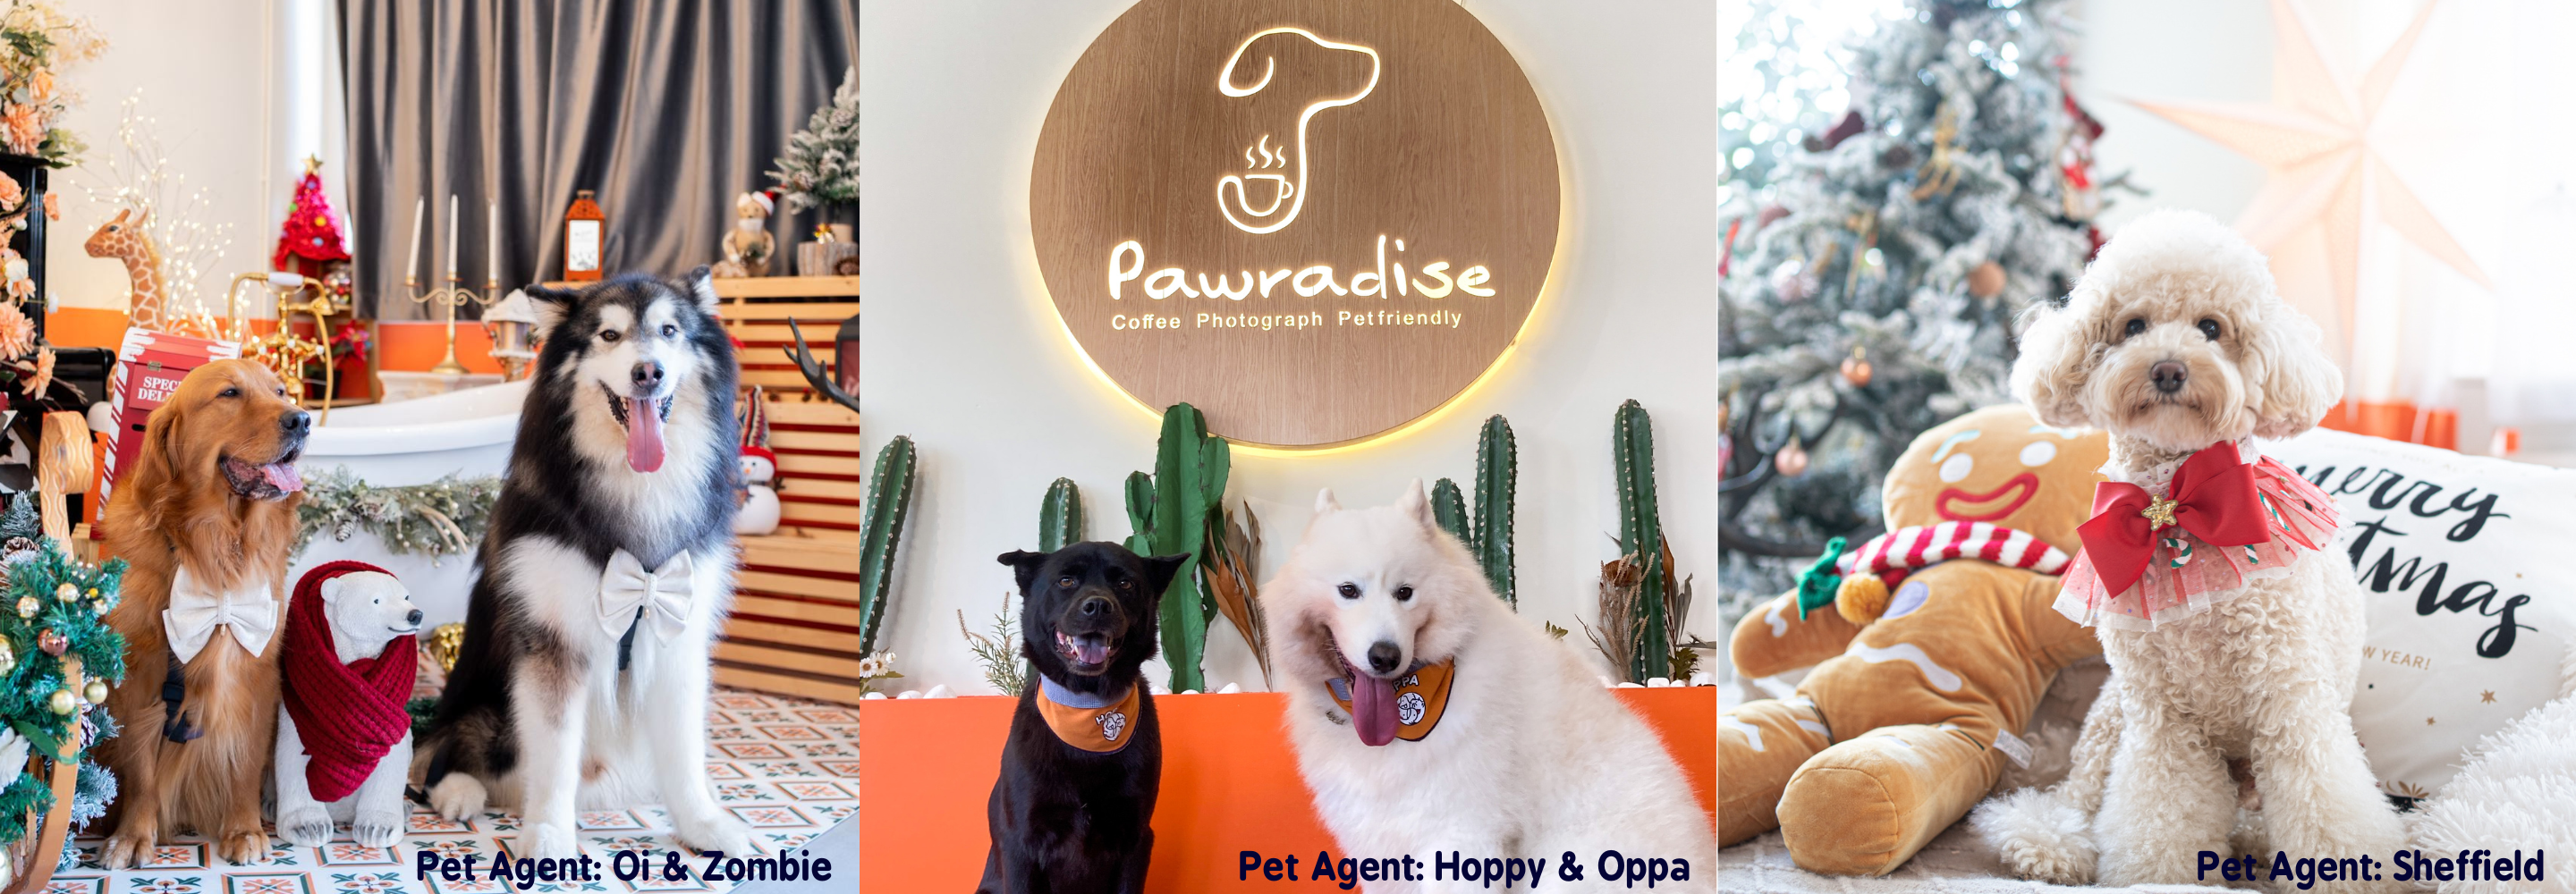 Pawradise - Hot 3000sq ft Shared Pet Party Place in Chai Wan is newly launched + PET-A-HOOD Member Limited Offer